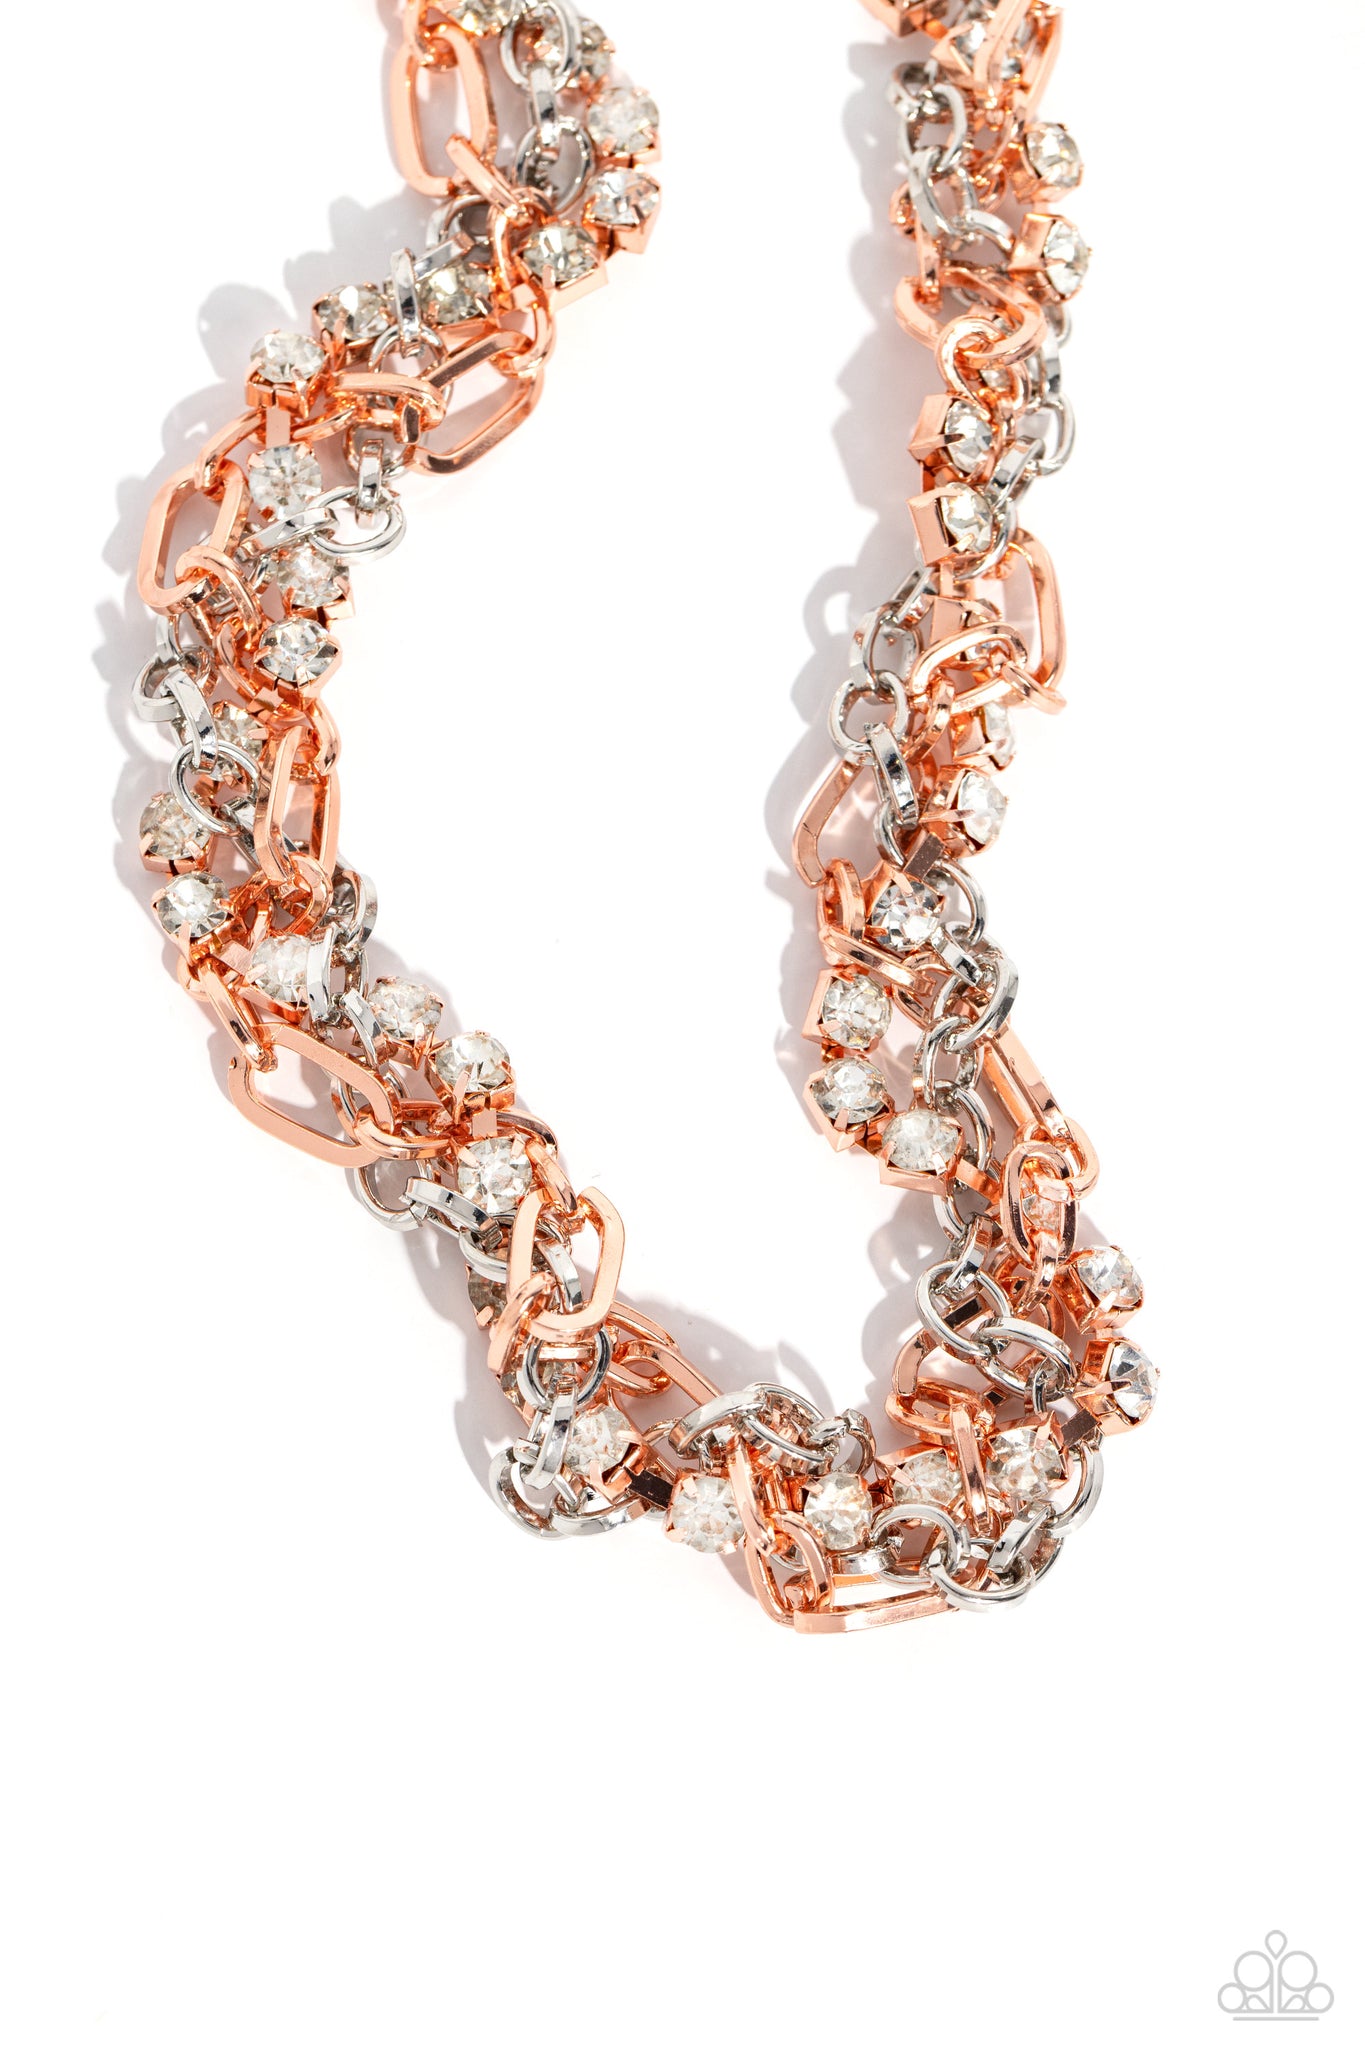 Totally Two-Toned Necklace (Multi, Silver, Copper)